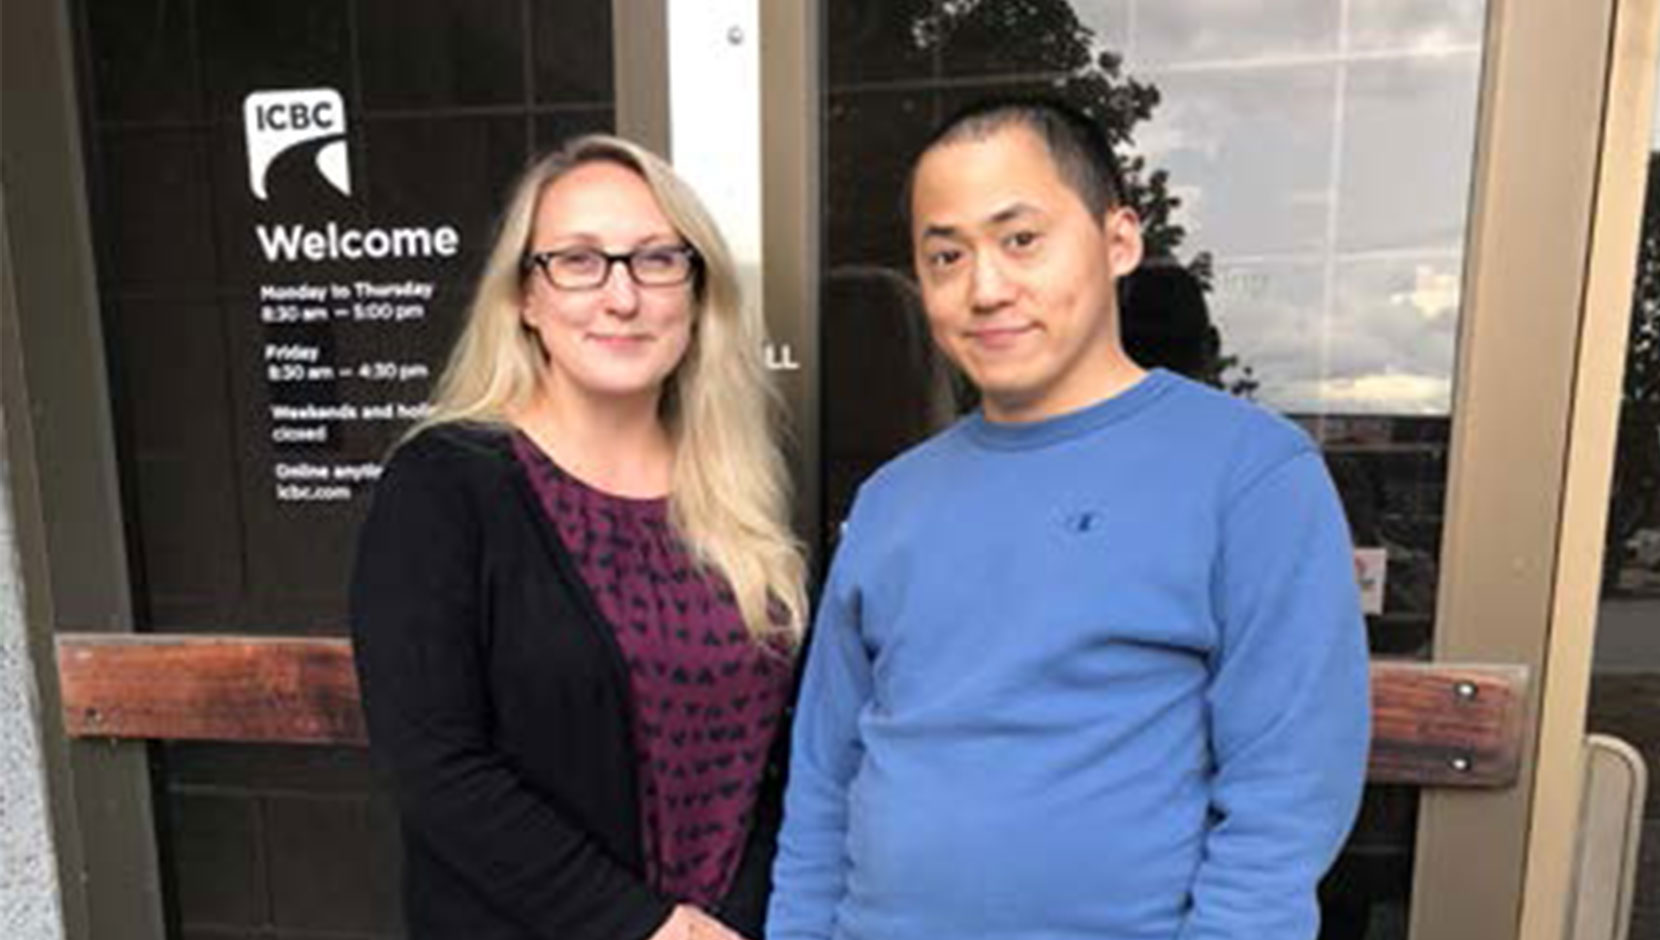 Calvin stands outside an ICBC office with his manager. He is a man of colour with short, dark hair, wearing a bright blue sweater. She is a white woman with long blonde hair and glasses, wearing a black sweater.